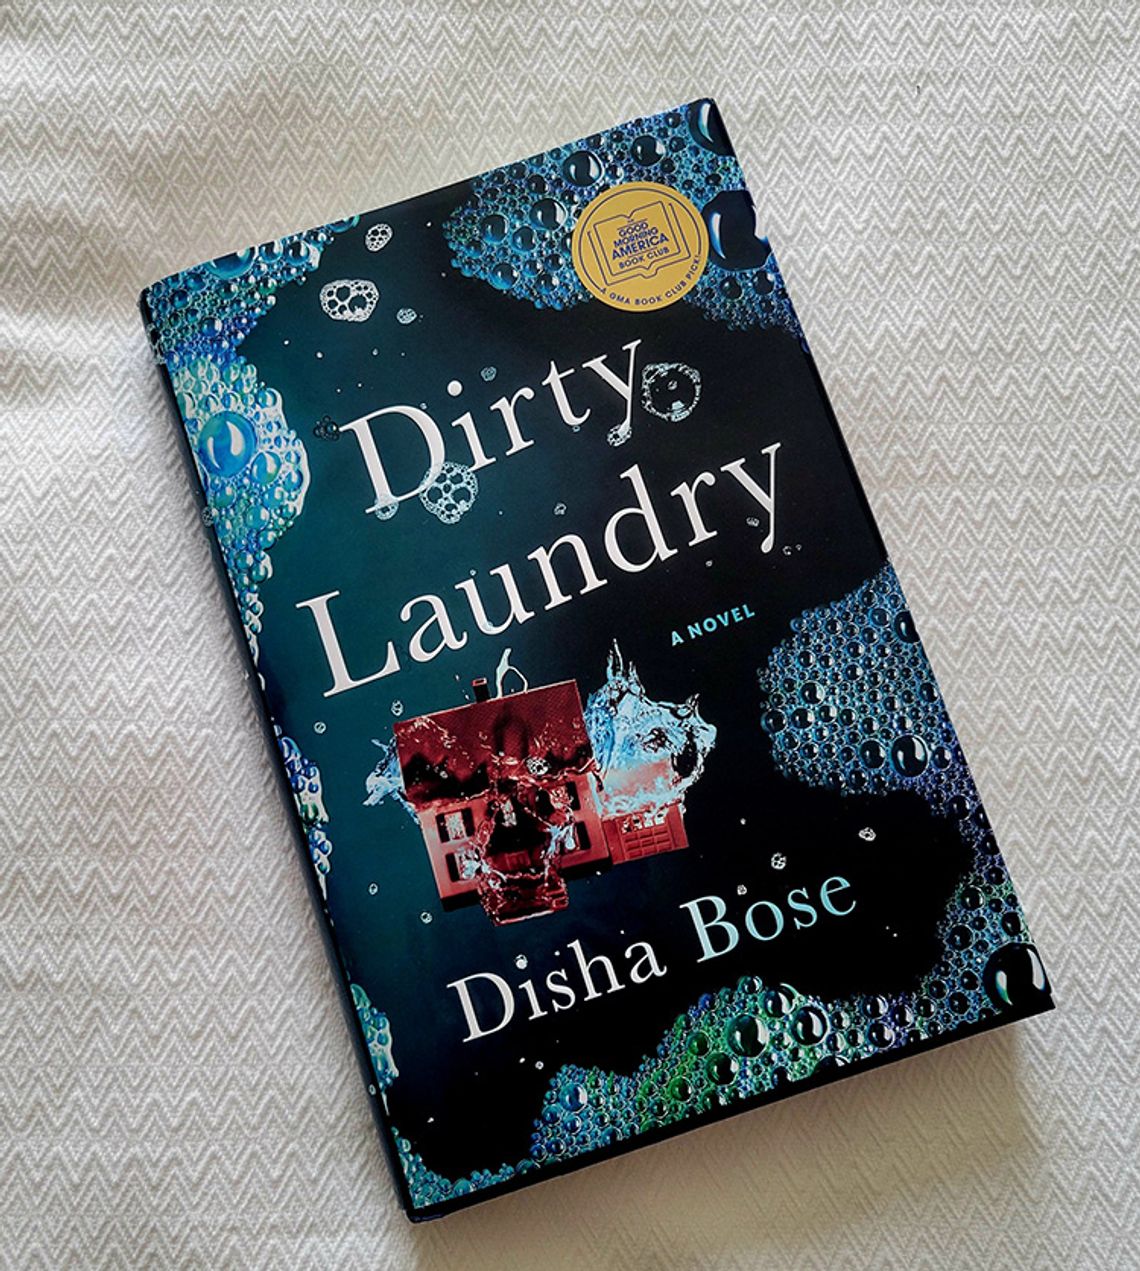 Allison’s Book Report — "Dirty Laundry" by Disha Bose